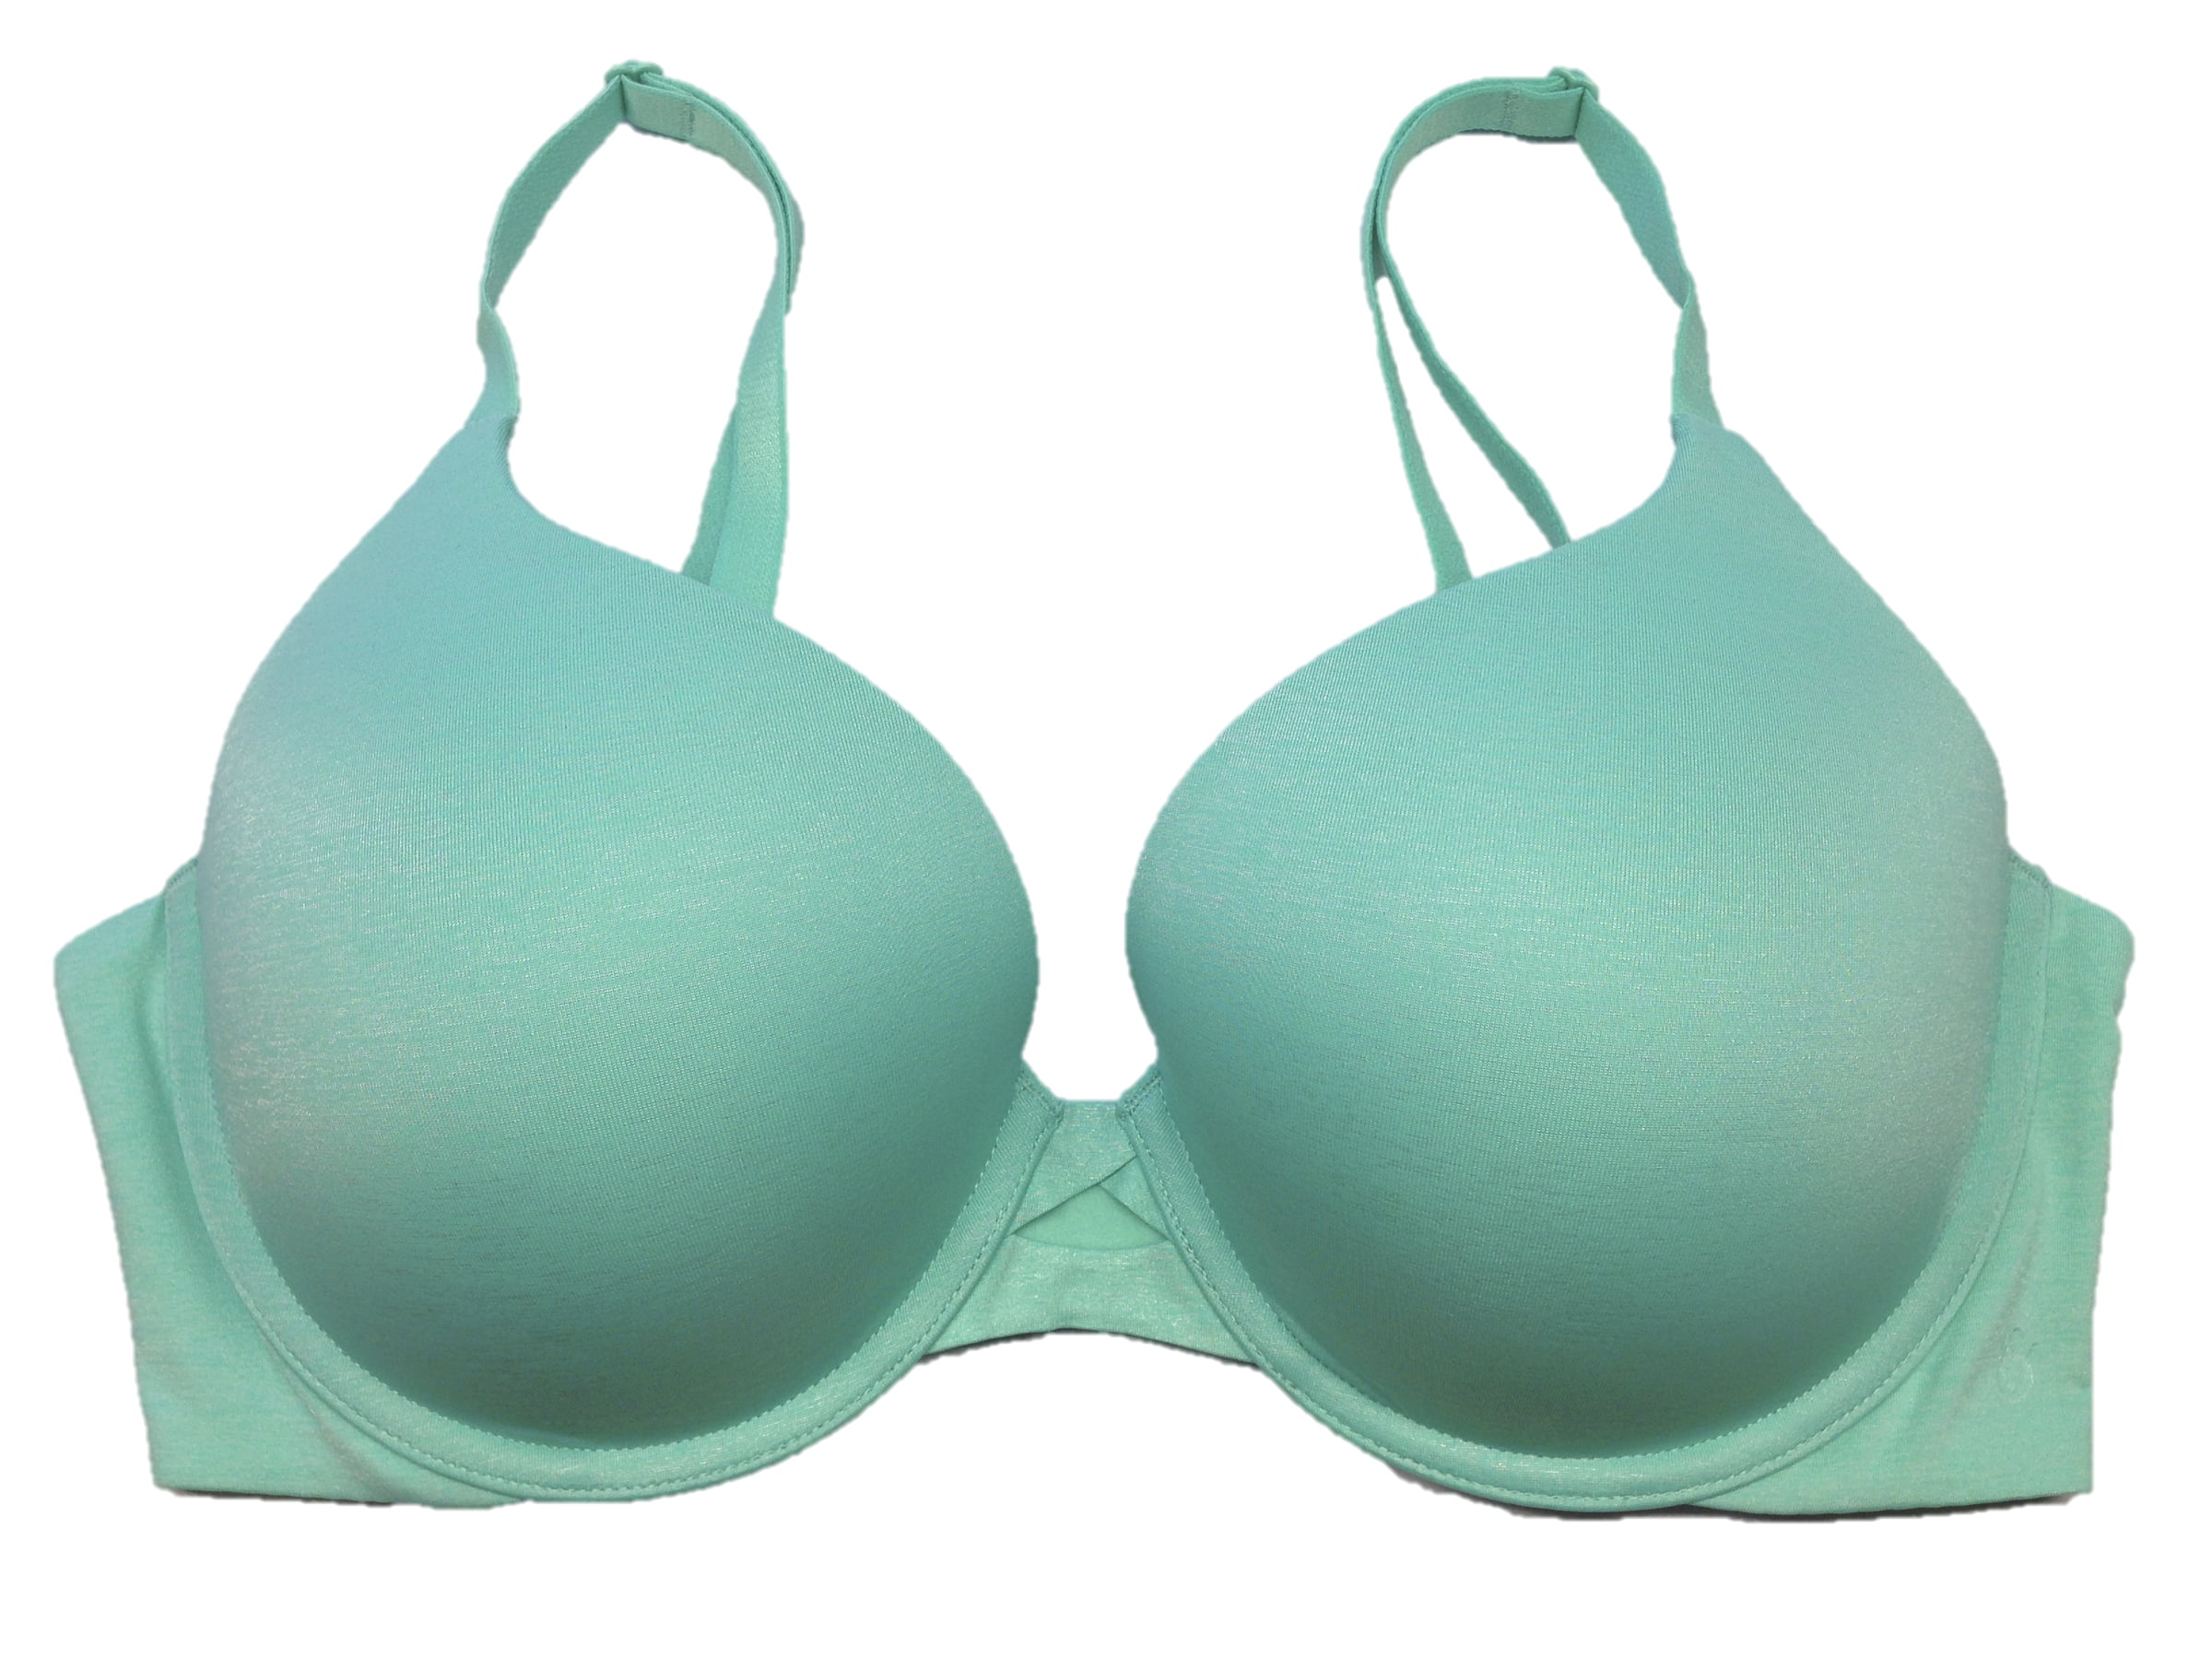  Victorias Secret Perfect Shape Push Up Bra, Full Coverage,  Lace, Padded, Bras For Women, Body By Victoria Collection, Green